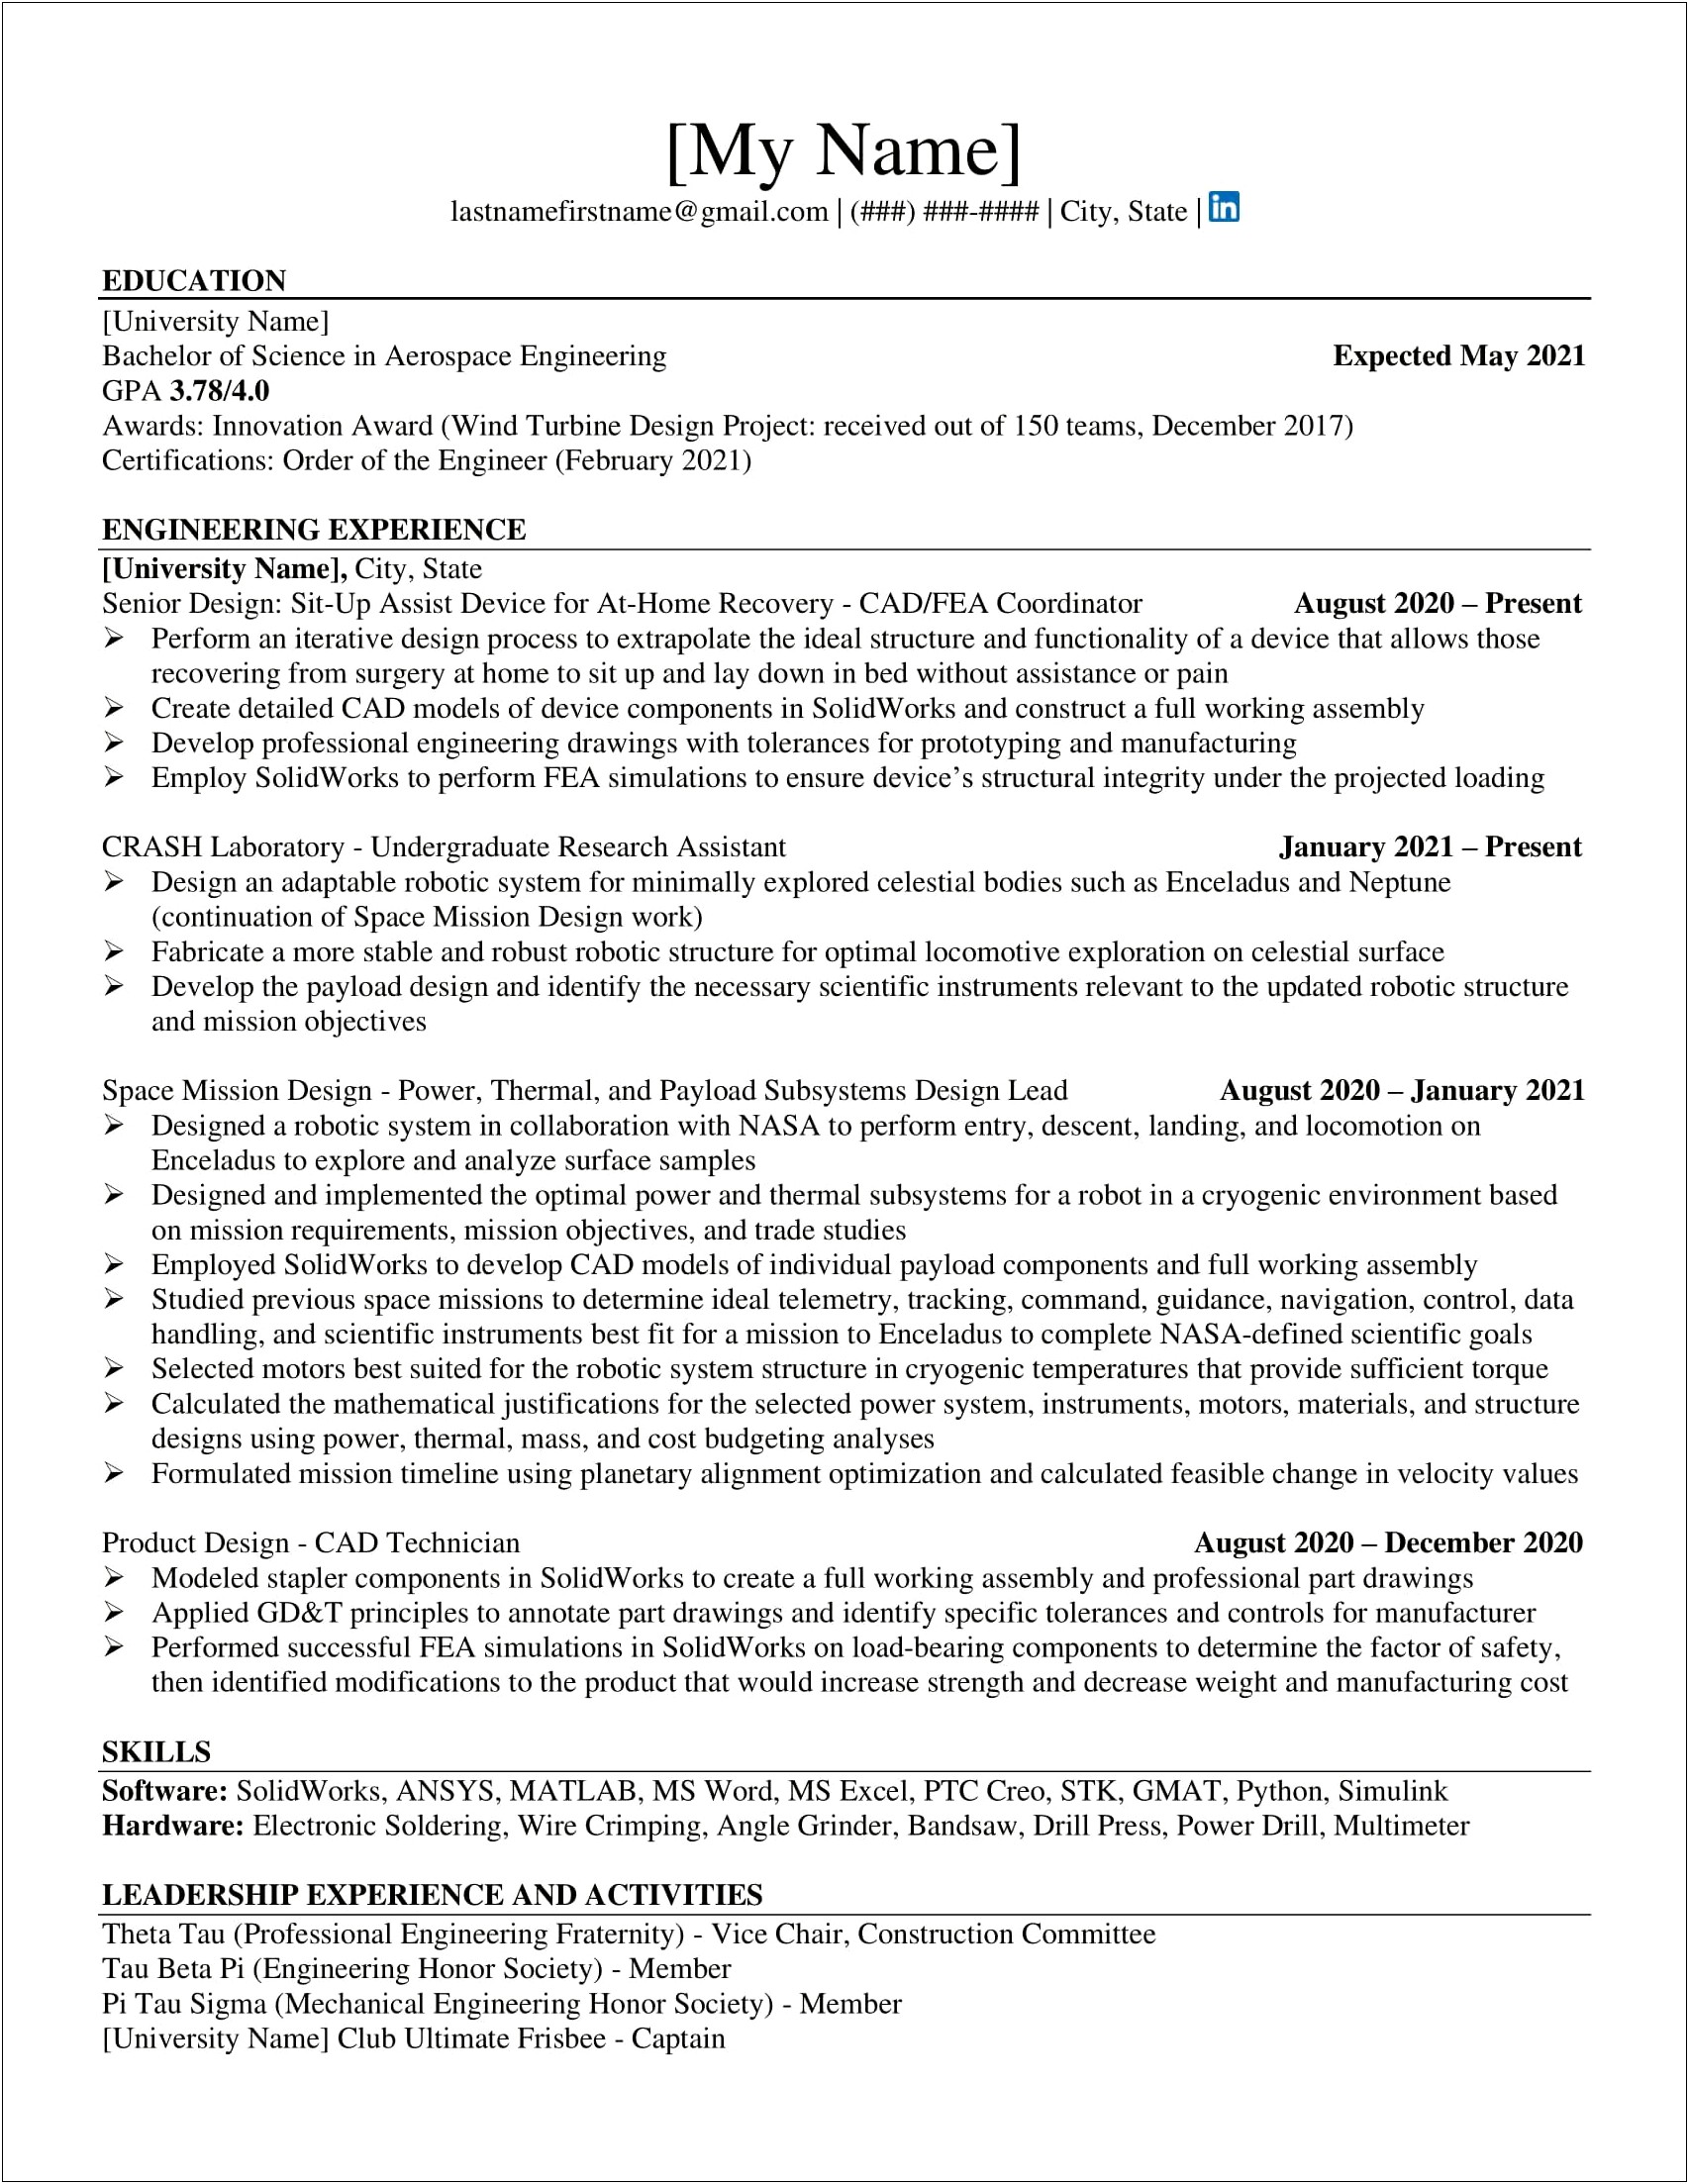 Does Professional Fraternity Look Good On Resume